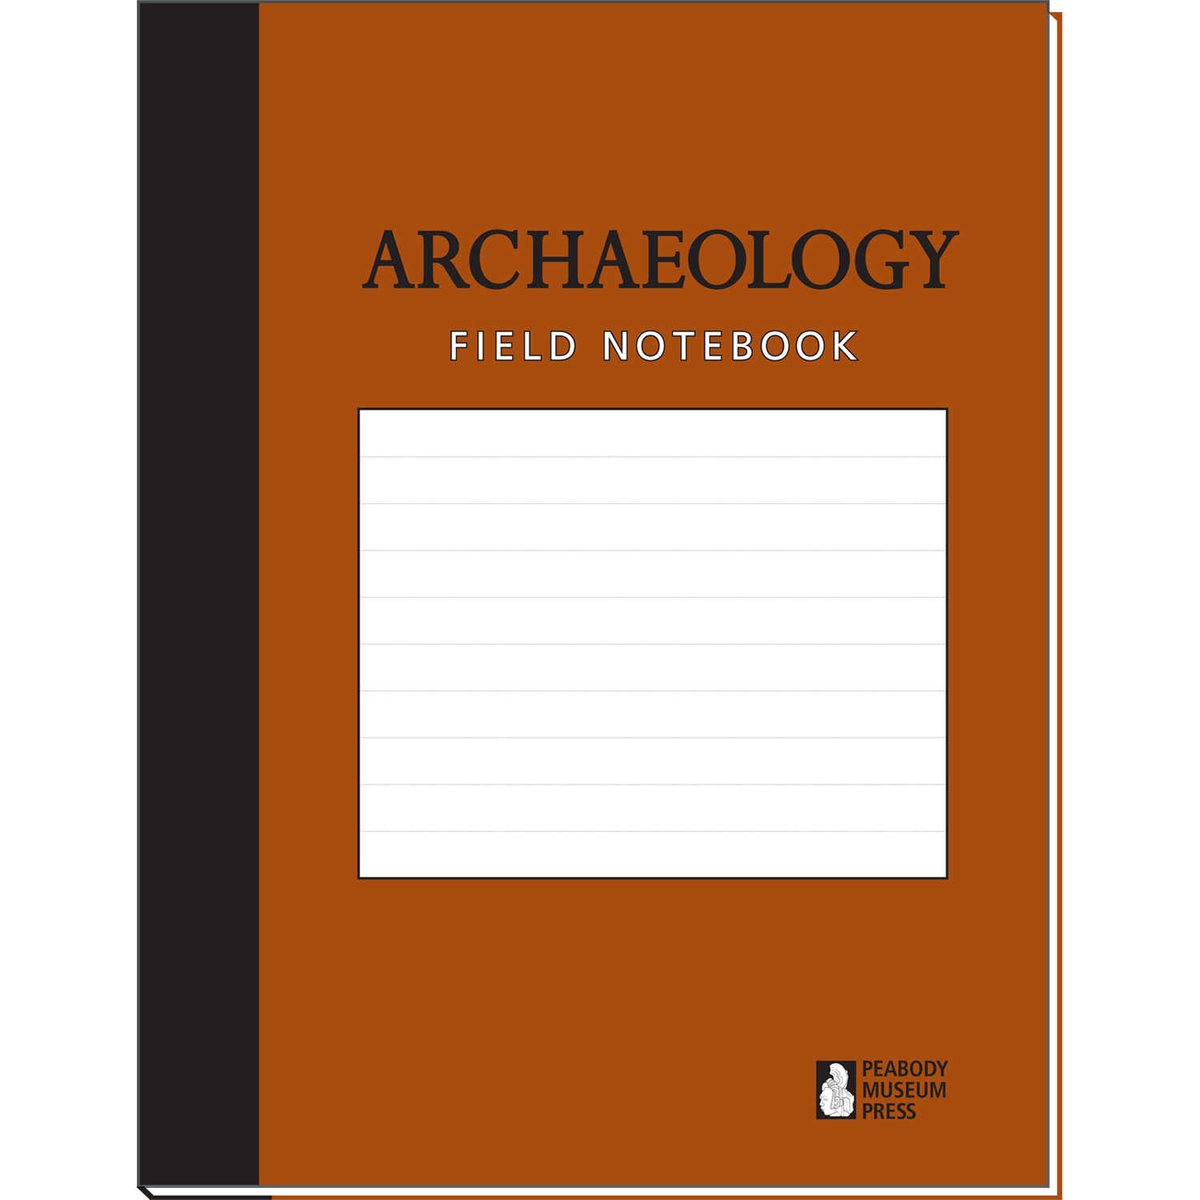 Archaeology notebooks might be as “official” as this one from Forestry Suppliers ( https://www.forestry-suppliers.com/product_pages/products.php?mi=72311&itemnum=49240), or - much more likely - as simple and inexpensive as the ones shown here /2  #festivalCHAT2020